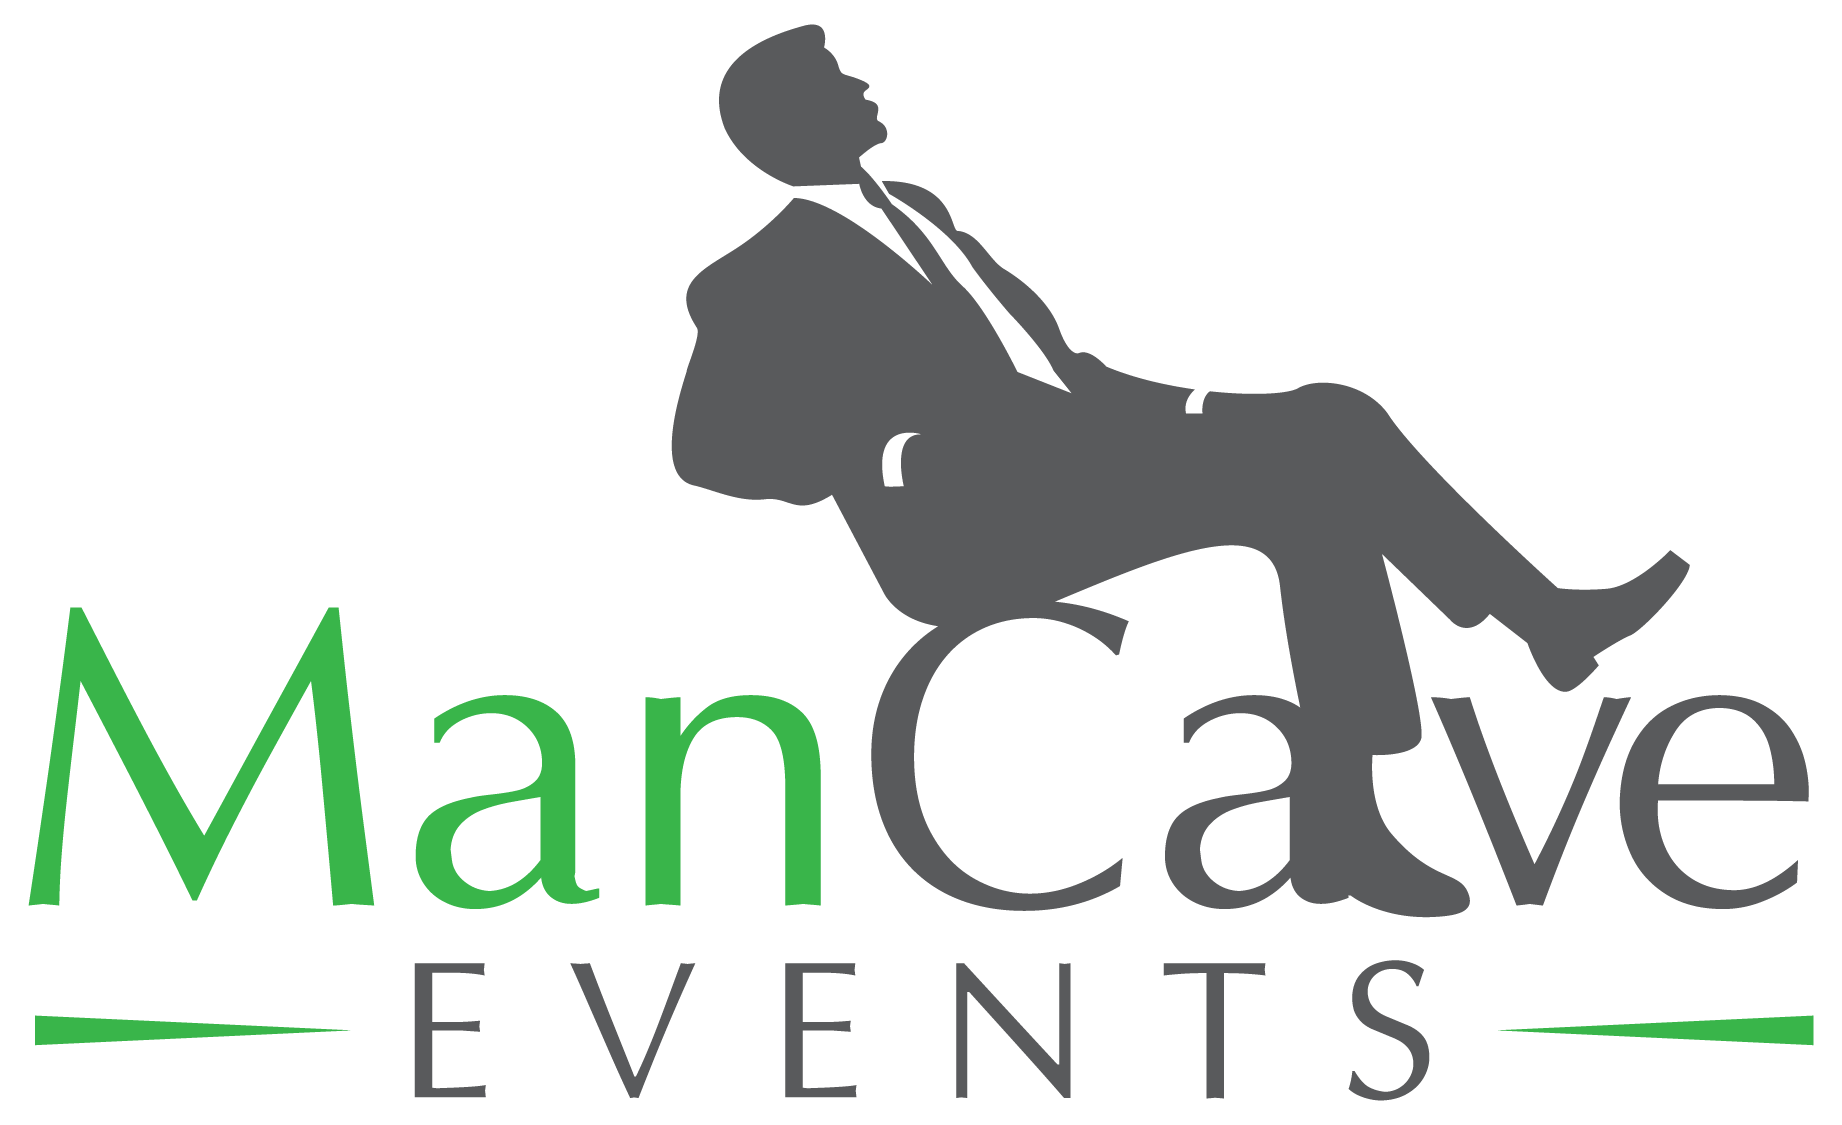 Man Cave Events